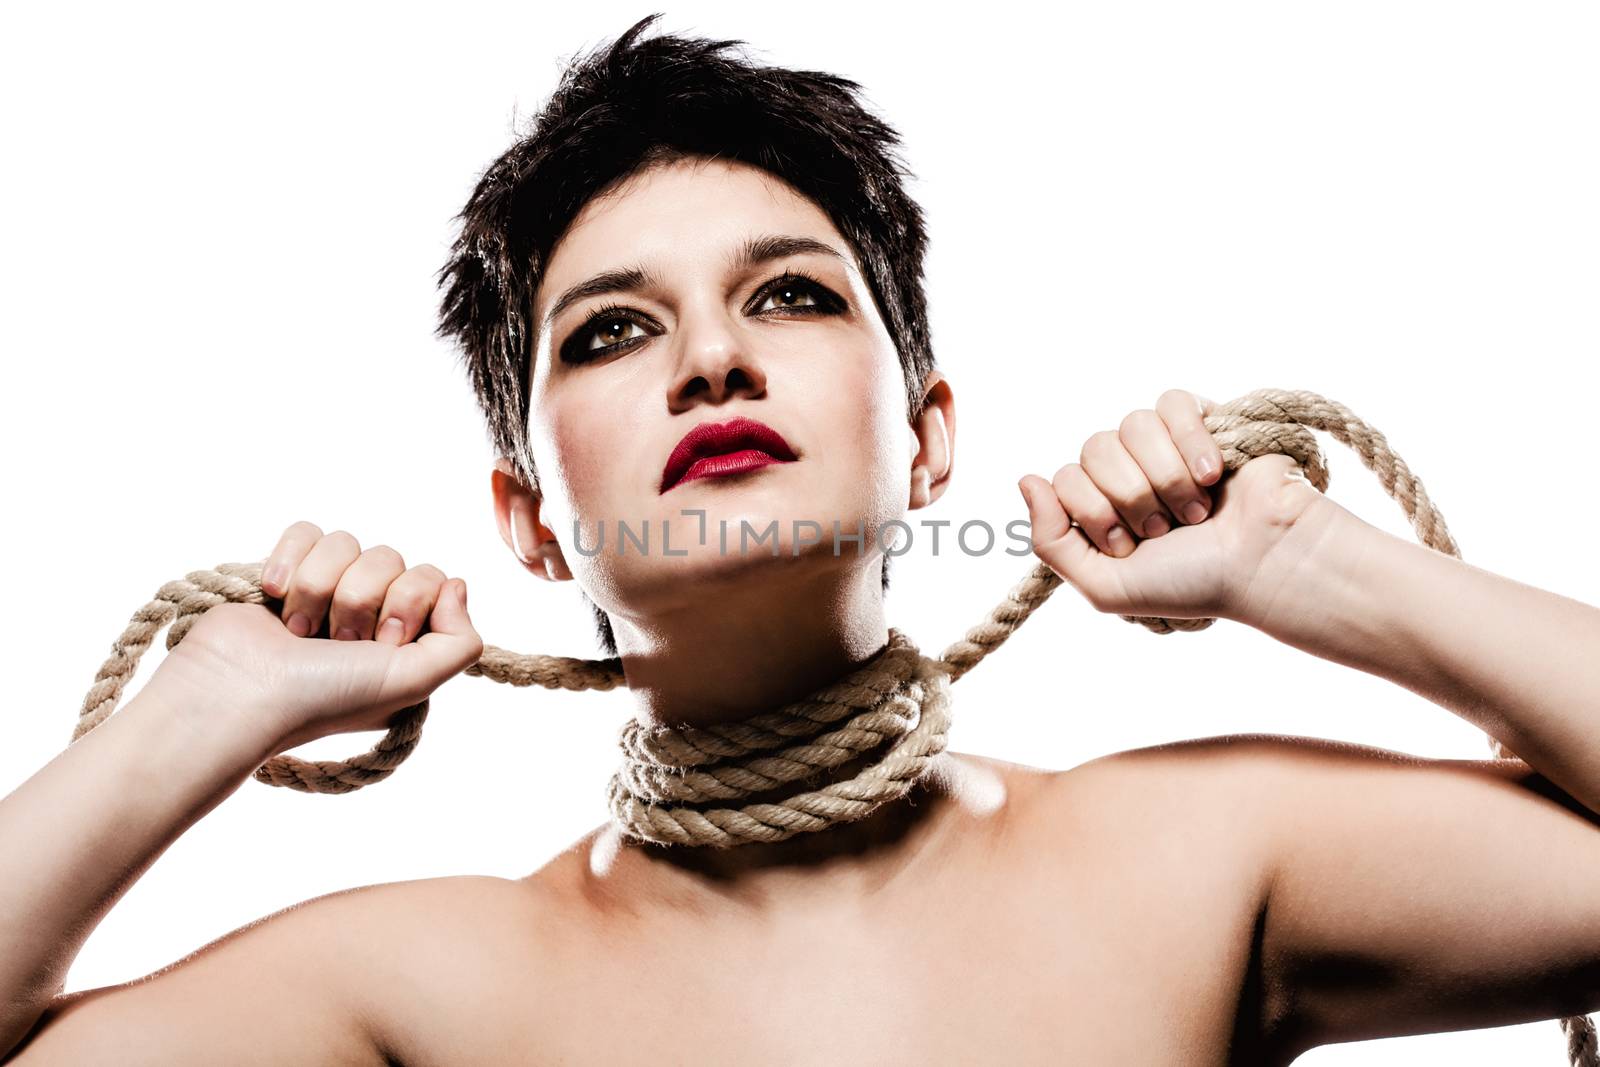 girl with short hair, having rope around her neck, looking up